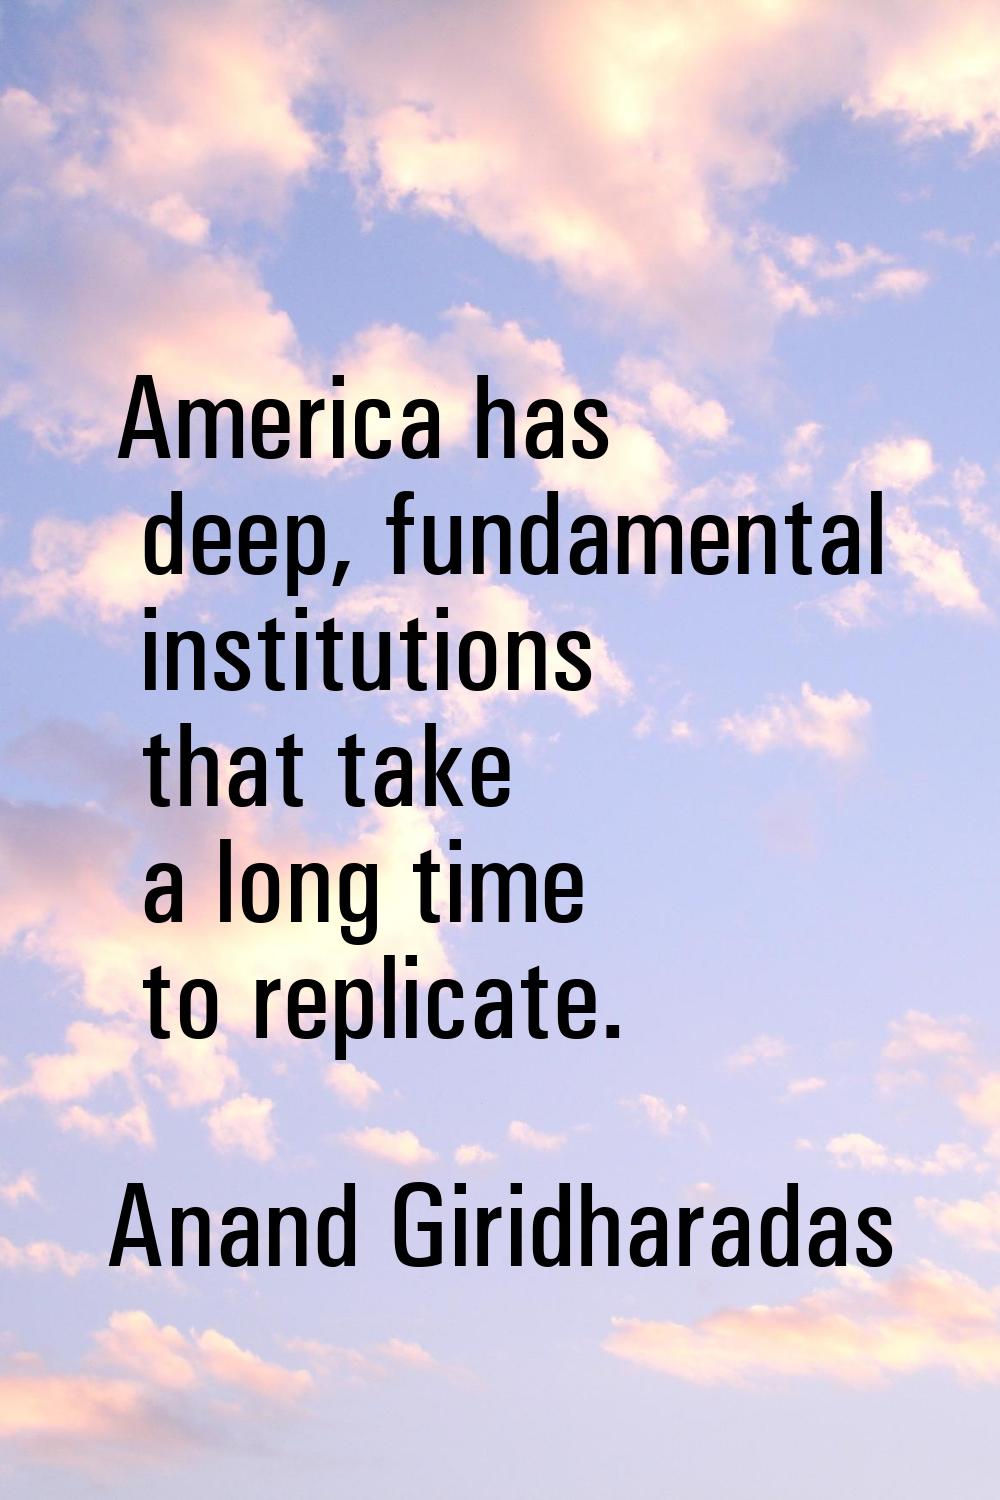 America has deep, fundamental institutions that take a long time to replicate.